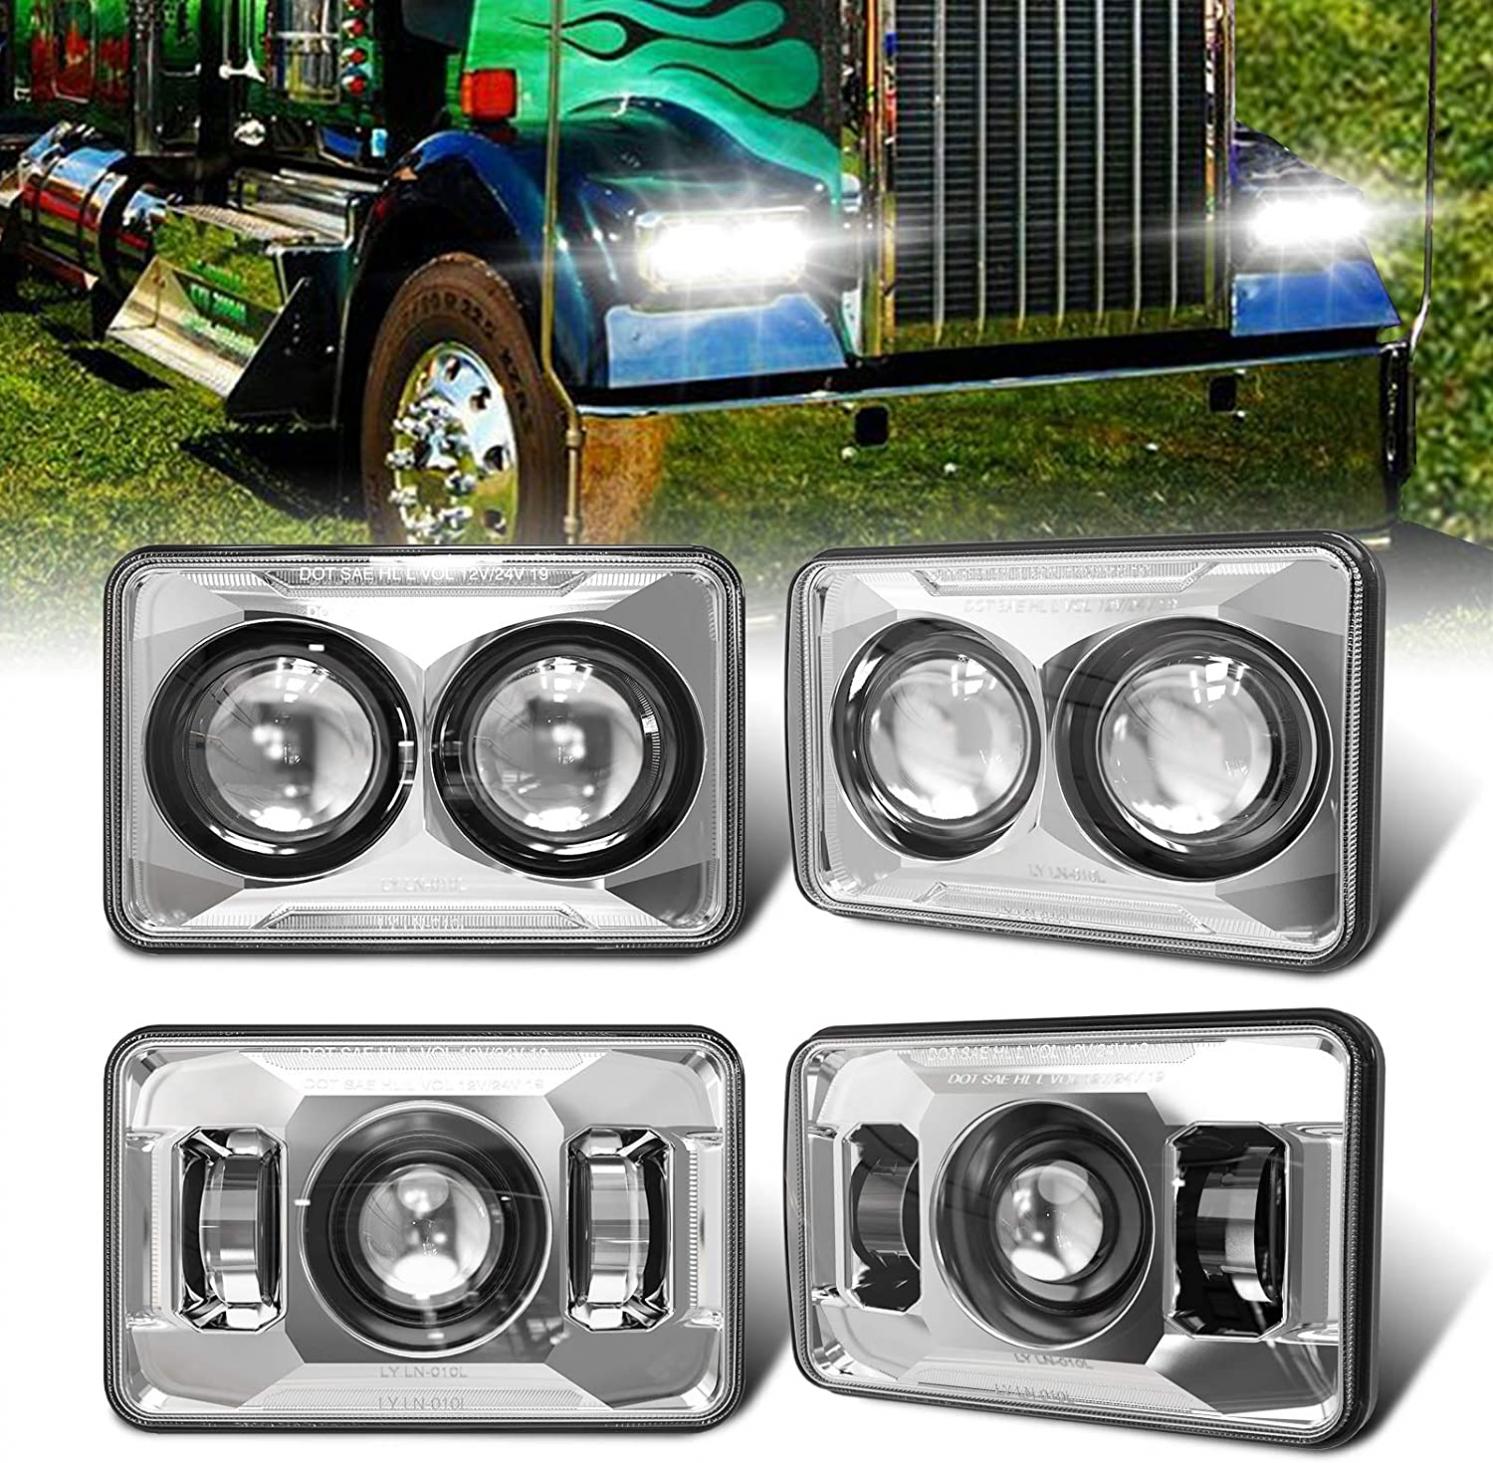 COWONE 60W 4x6 inch LED Headlights [Hi/lo Beam Separately] Compatible with Kenworth T800 T600 Peterbilt 379 Feightliner O-ldsmobile Cutlass H4651 H4652 H4656 H4666 H6545 - Chrome